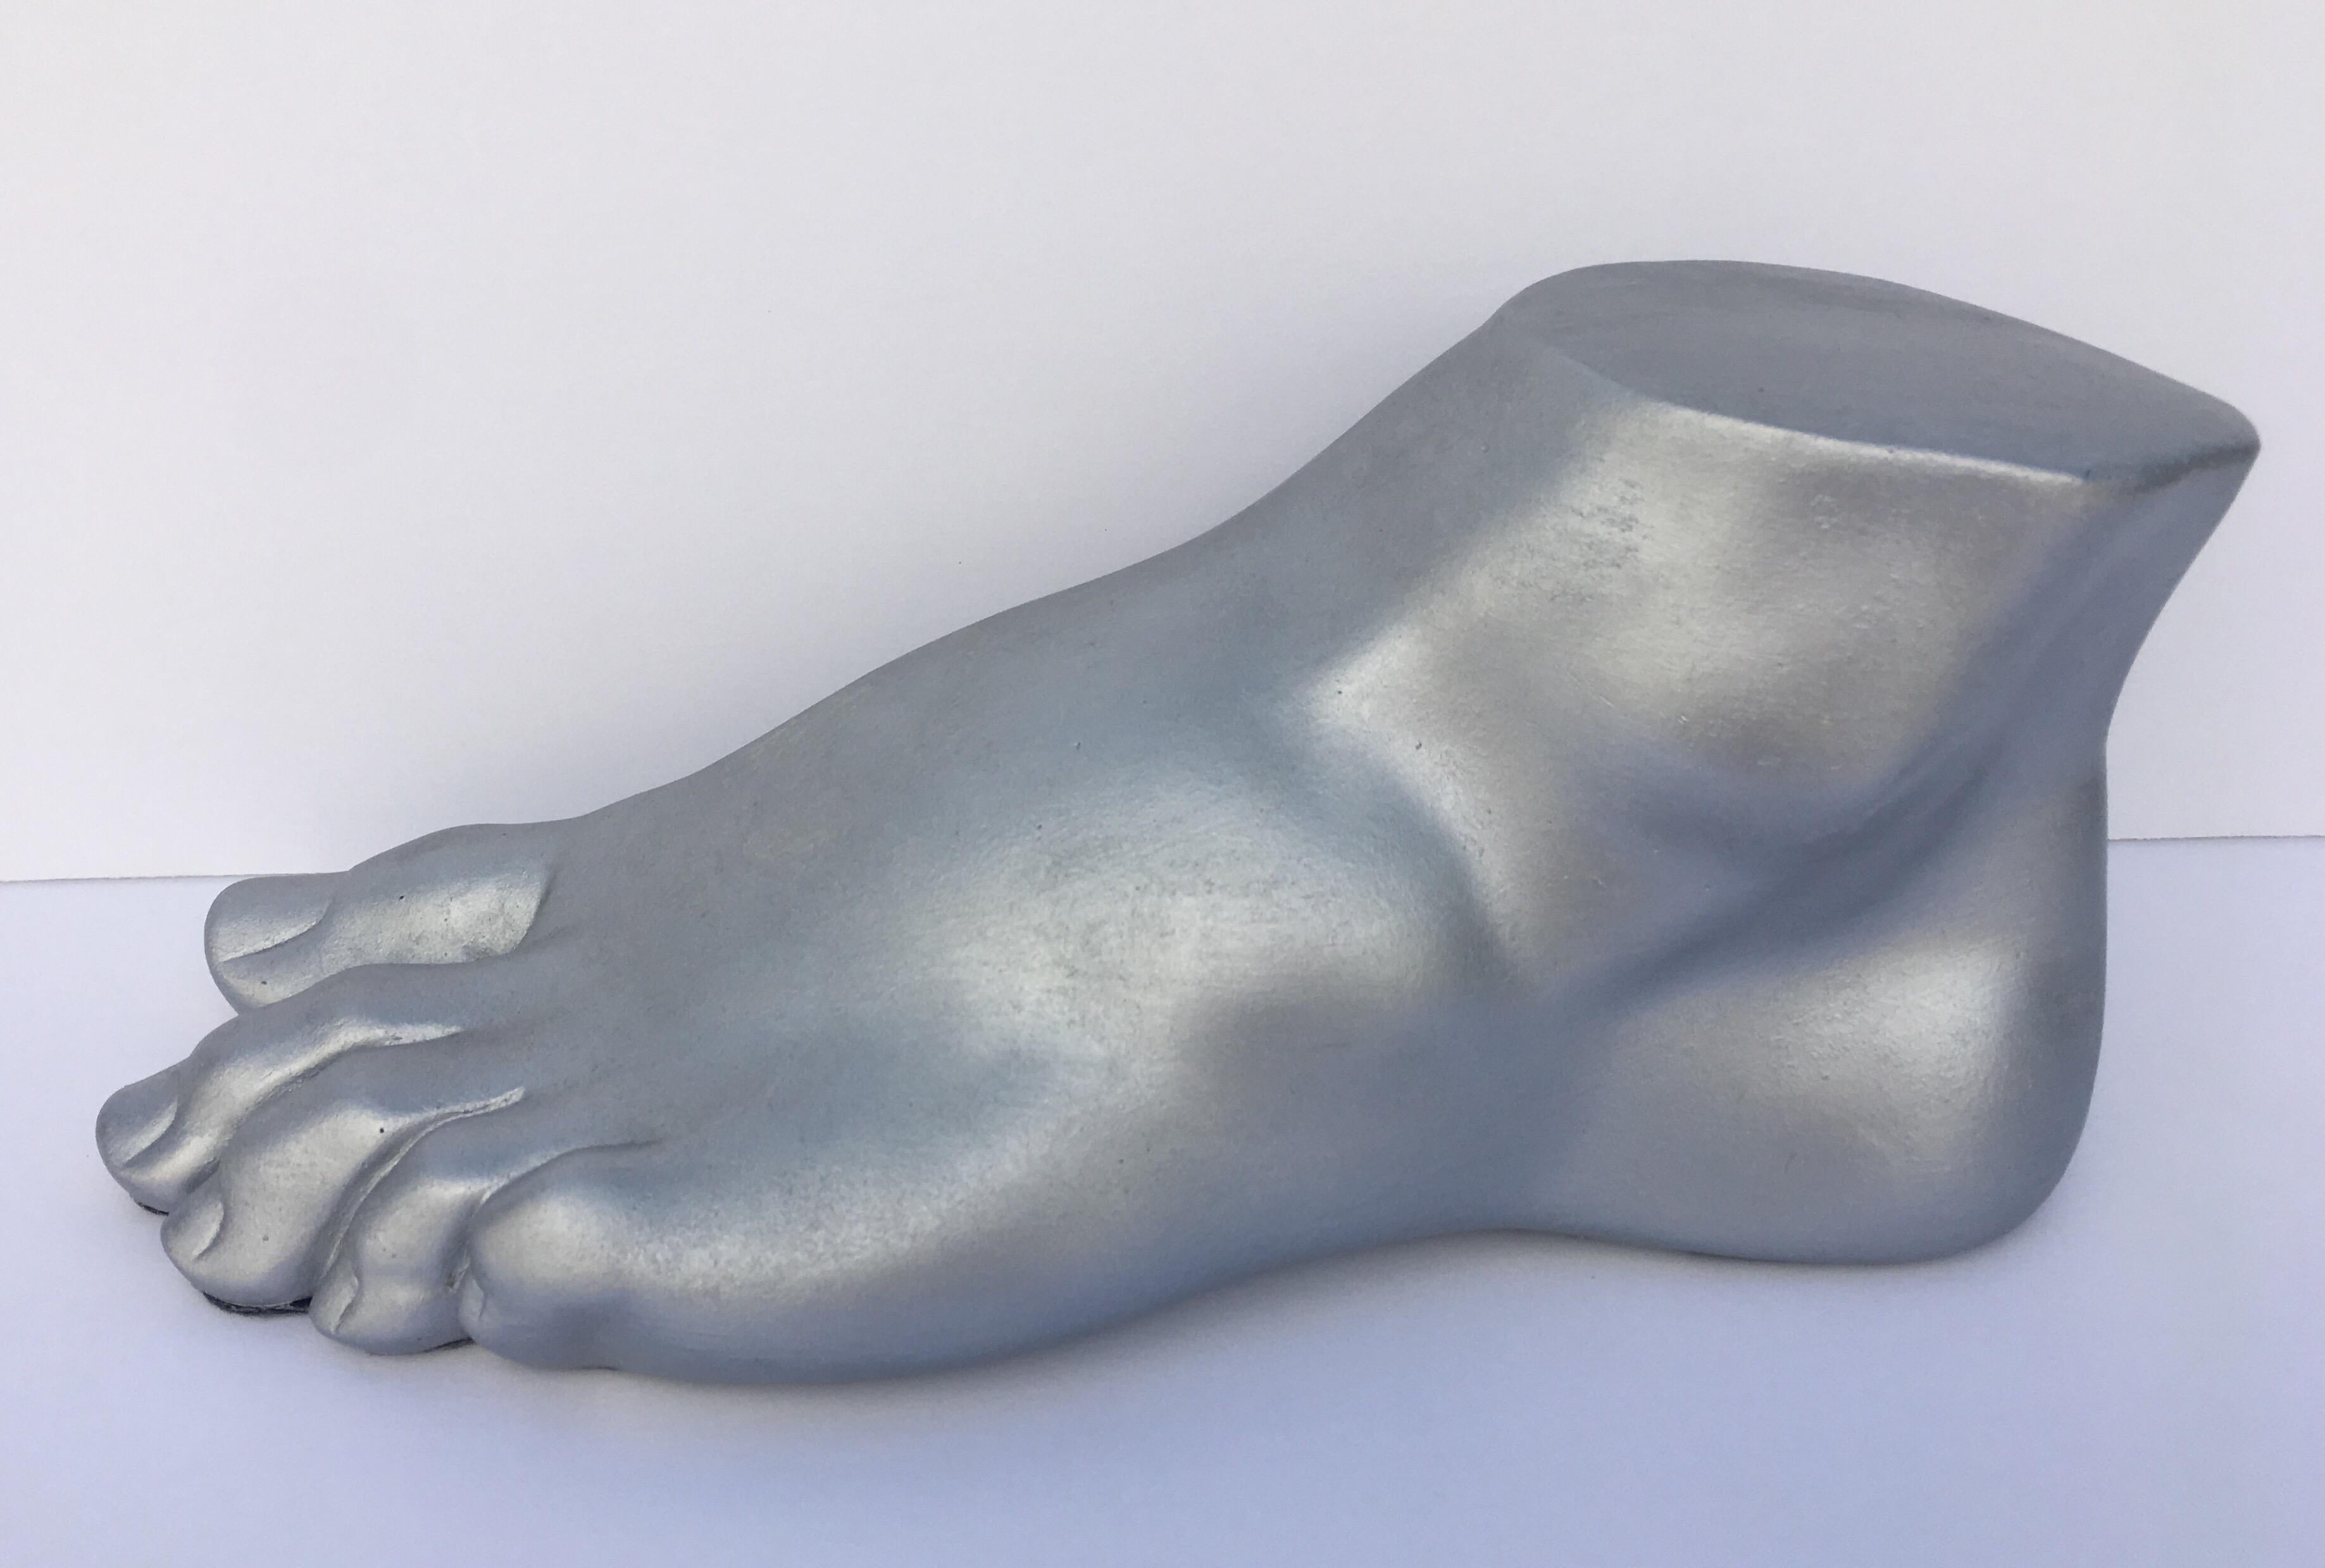 Neoclassical style plaster cast foot fragment sculpture featuring a patinated silver metallic finish. An interesting tabletop accessory for any Hollywood Regency interior.